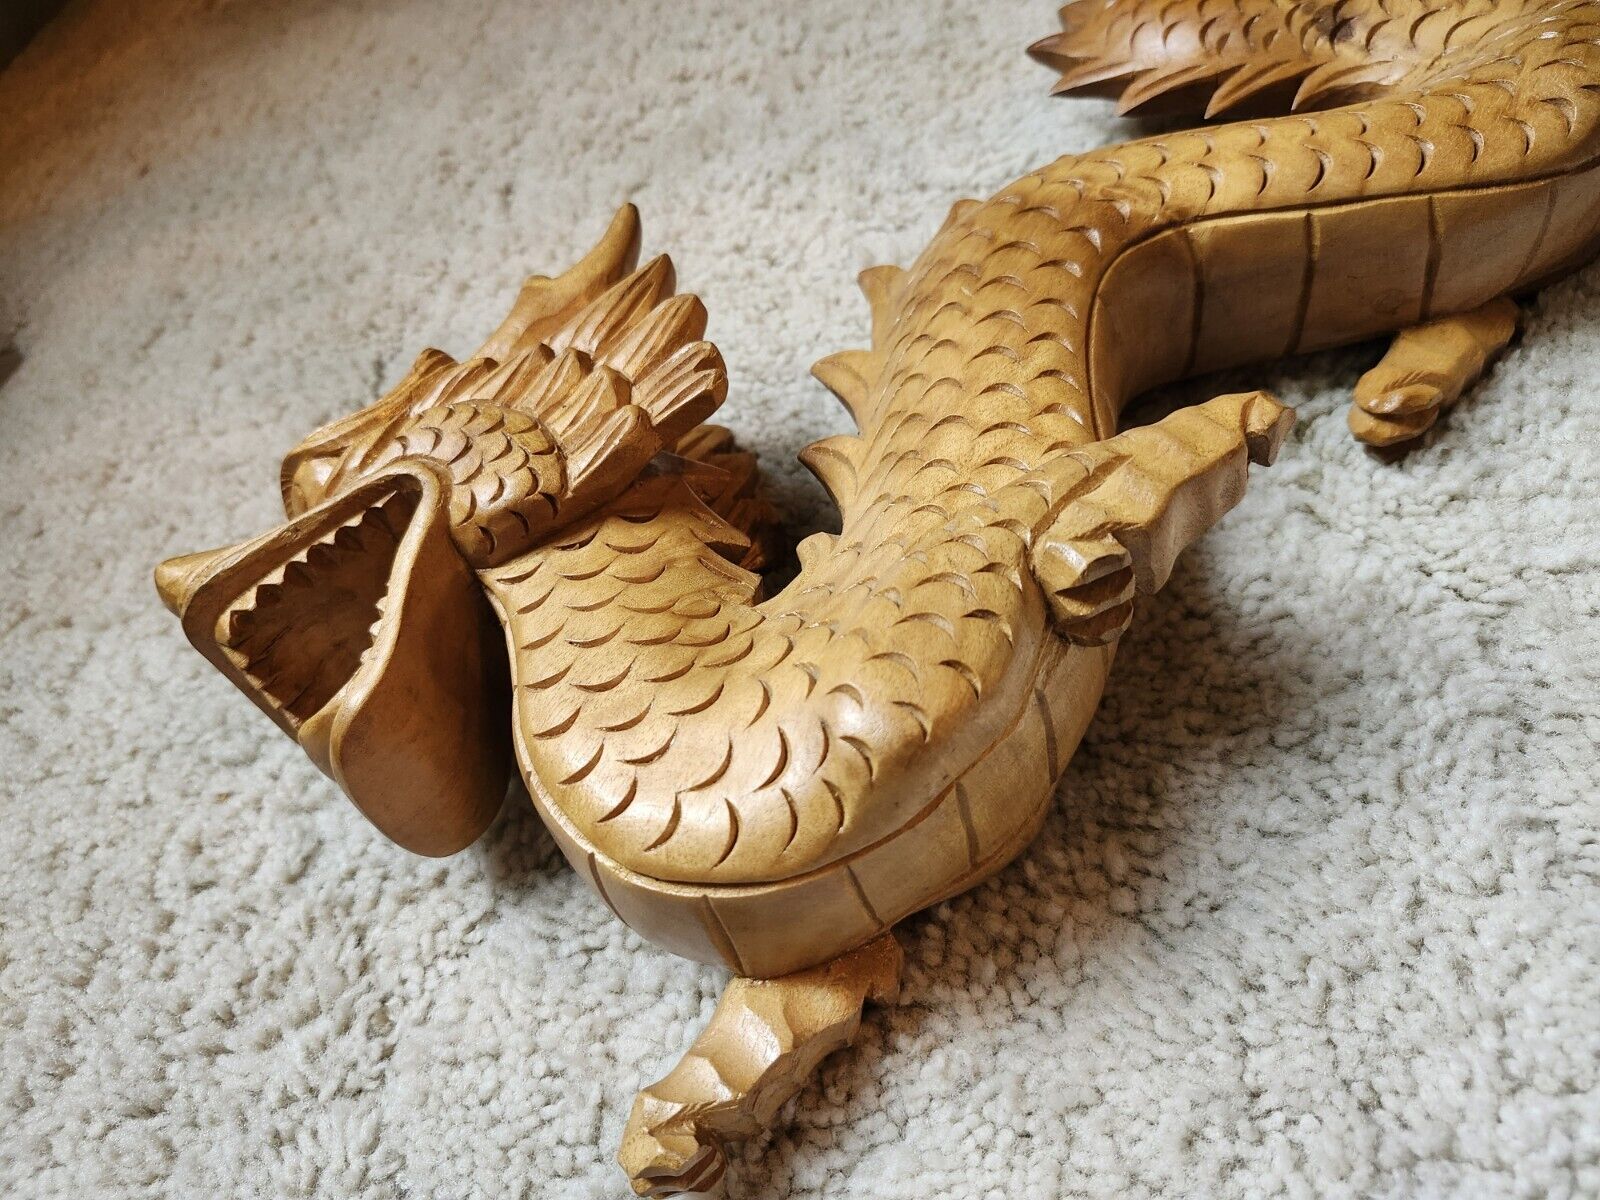 Asian Wooden Dragon Statue Rare Find 15 Inches Long